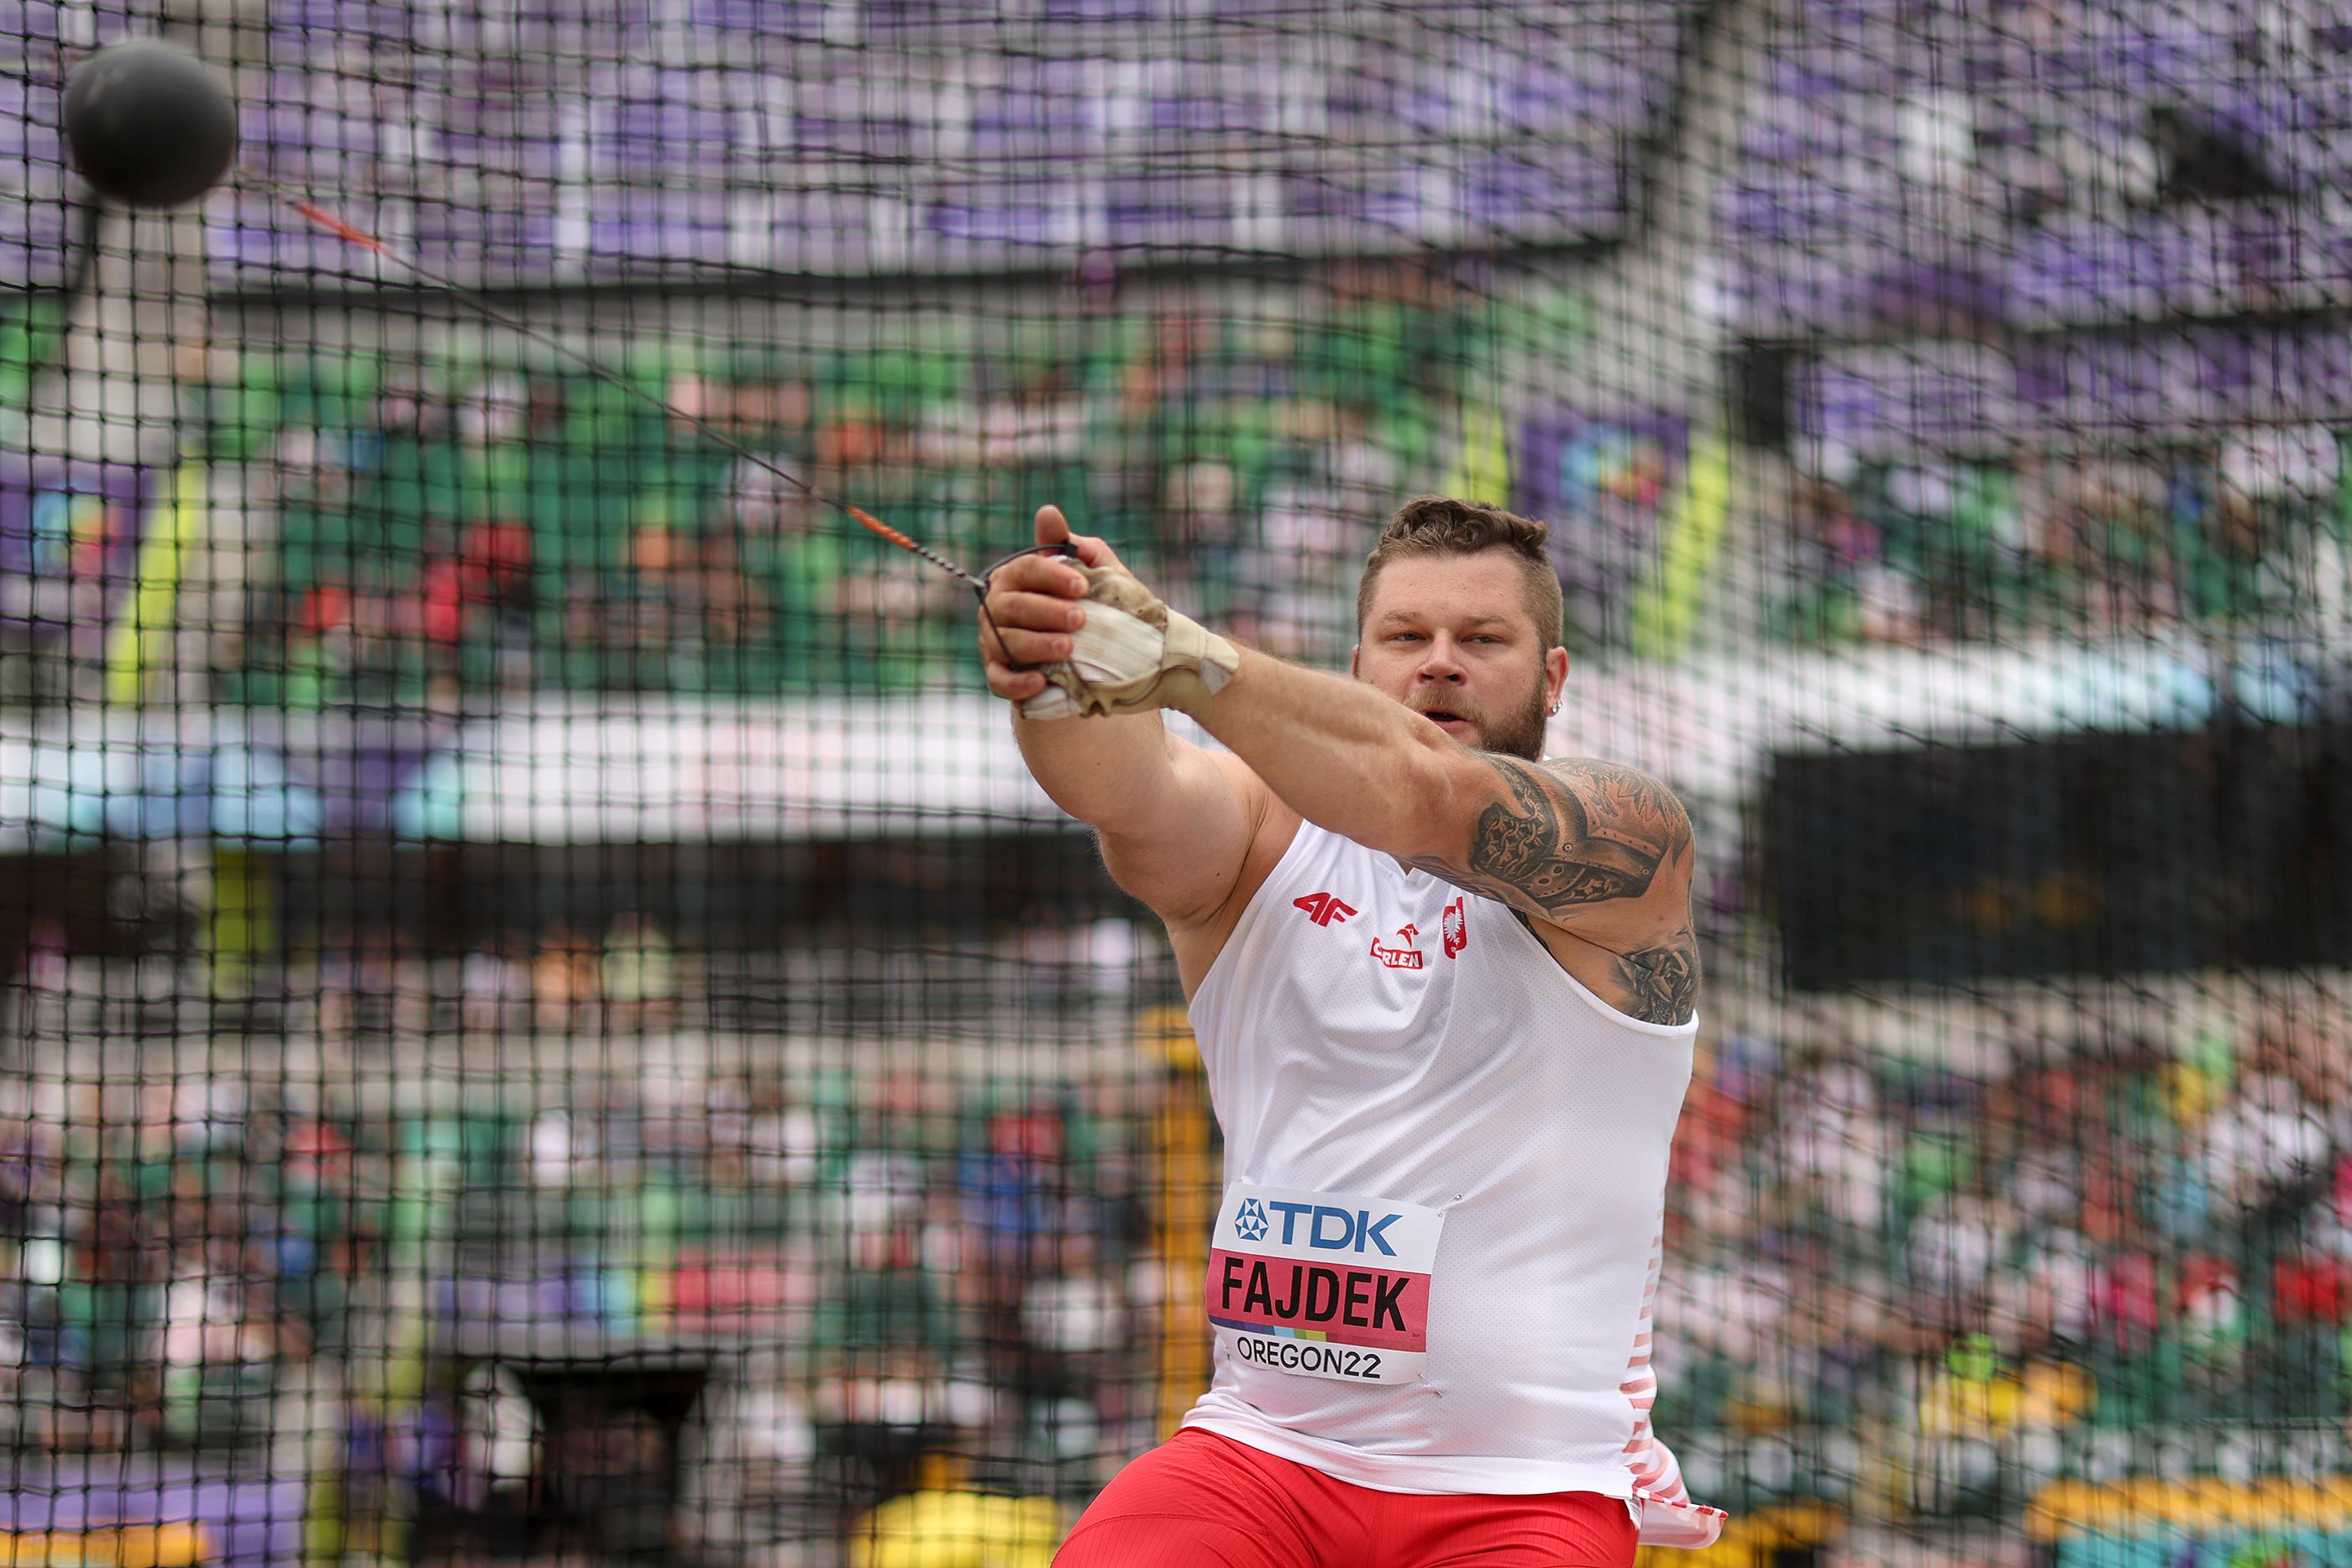 Poland's Pawel Fajdek competes in the hammer final at the World Athletics Championships Oregon22